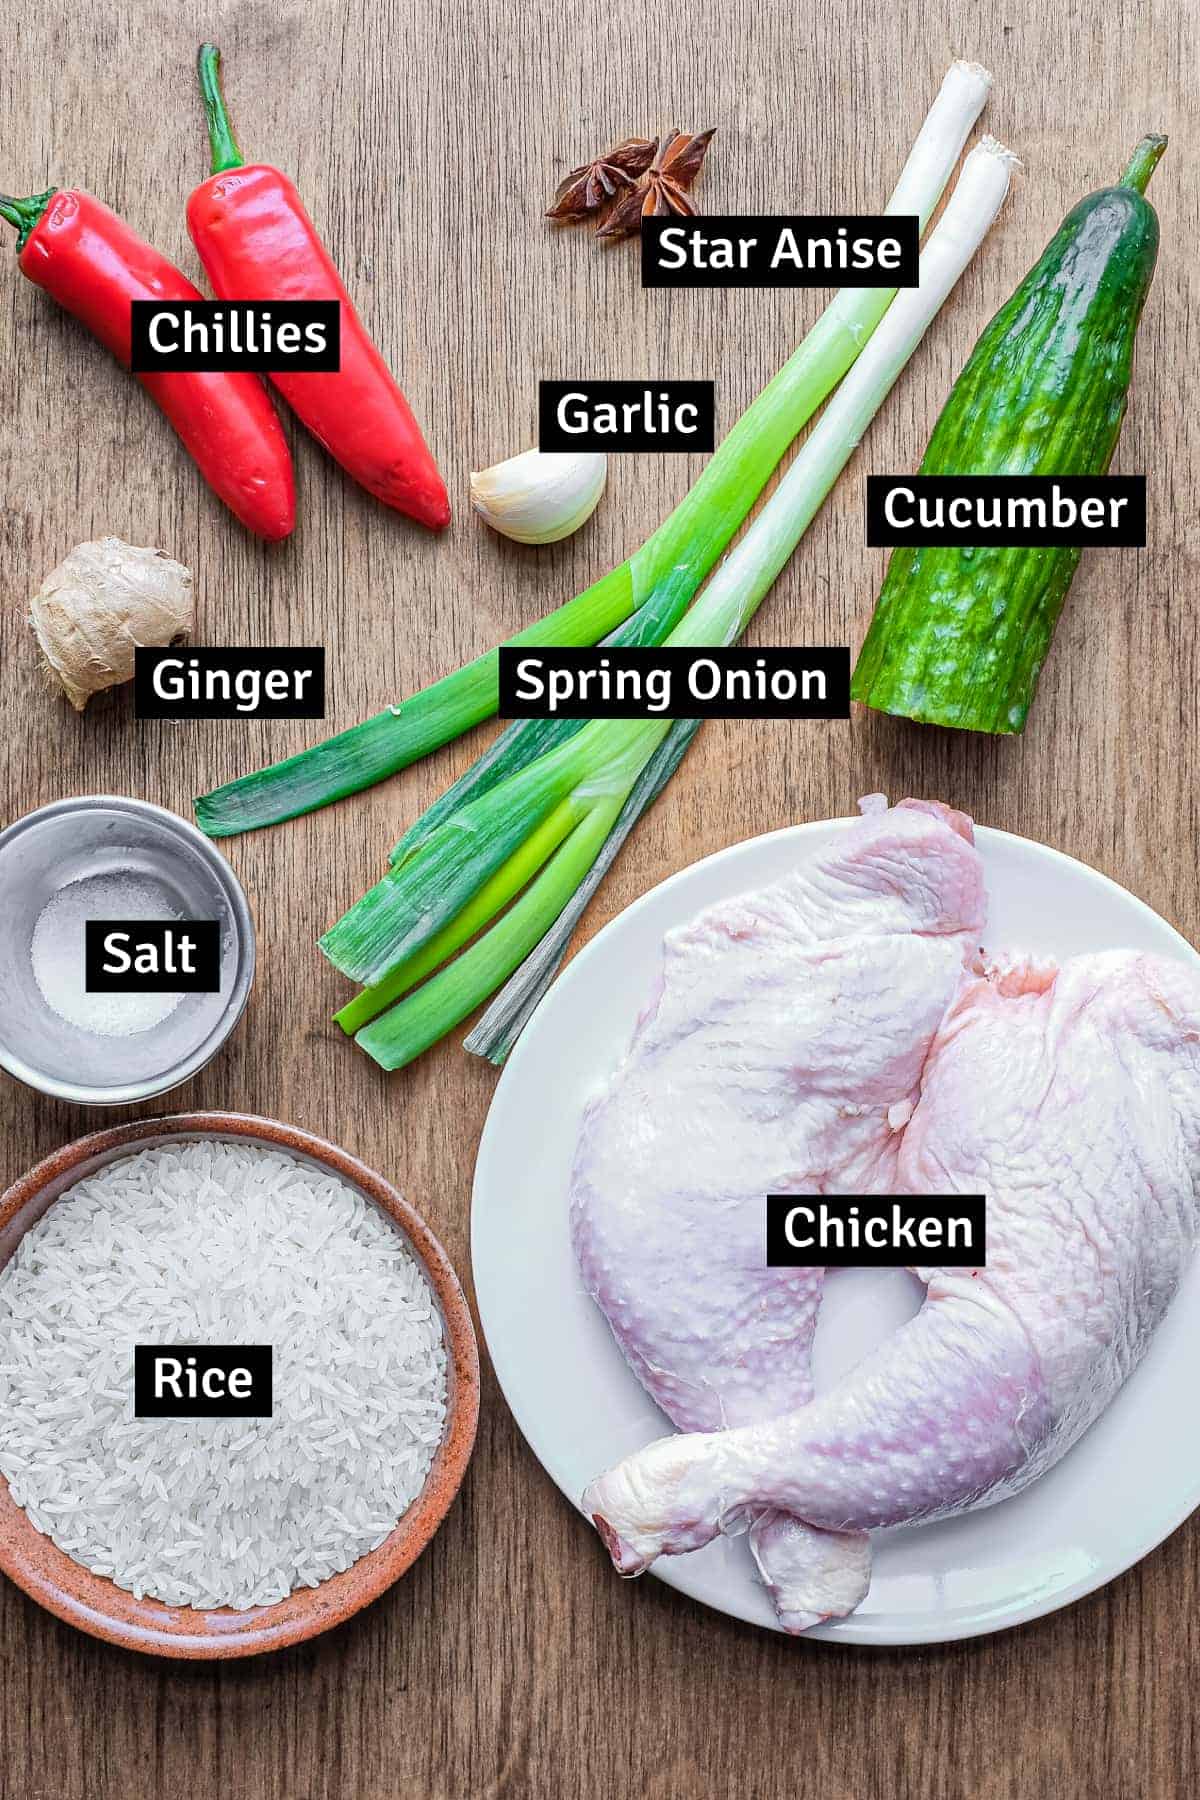 The ingredients for Hainan Chicken and Rice: Chicken portions, spring onion, ginger, garlic, rice, star anise, chillies, cucumber and salt